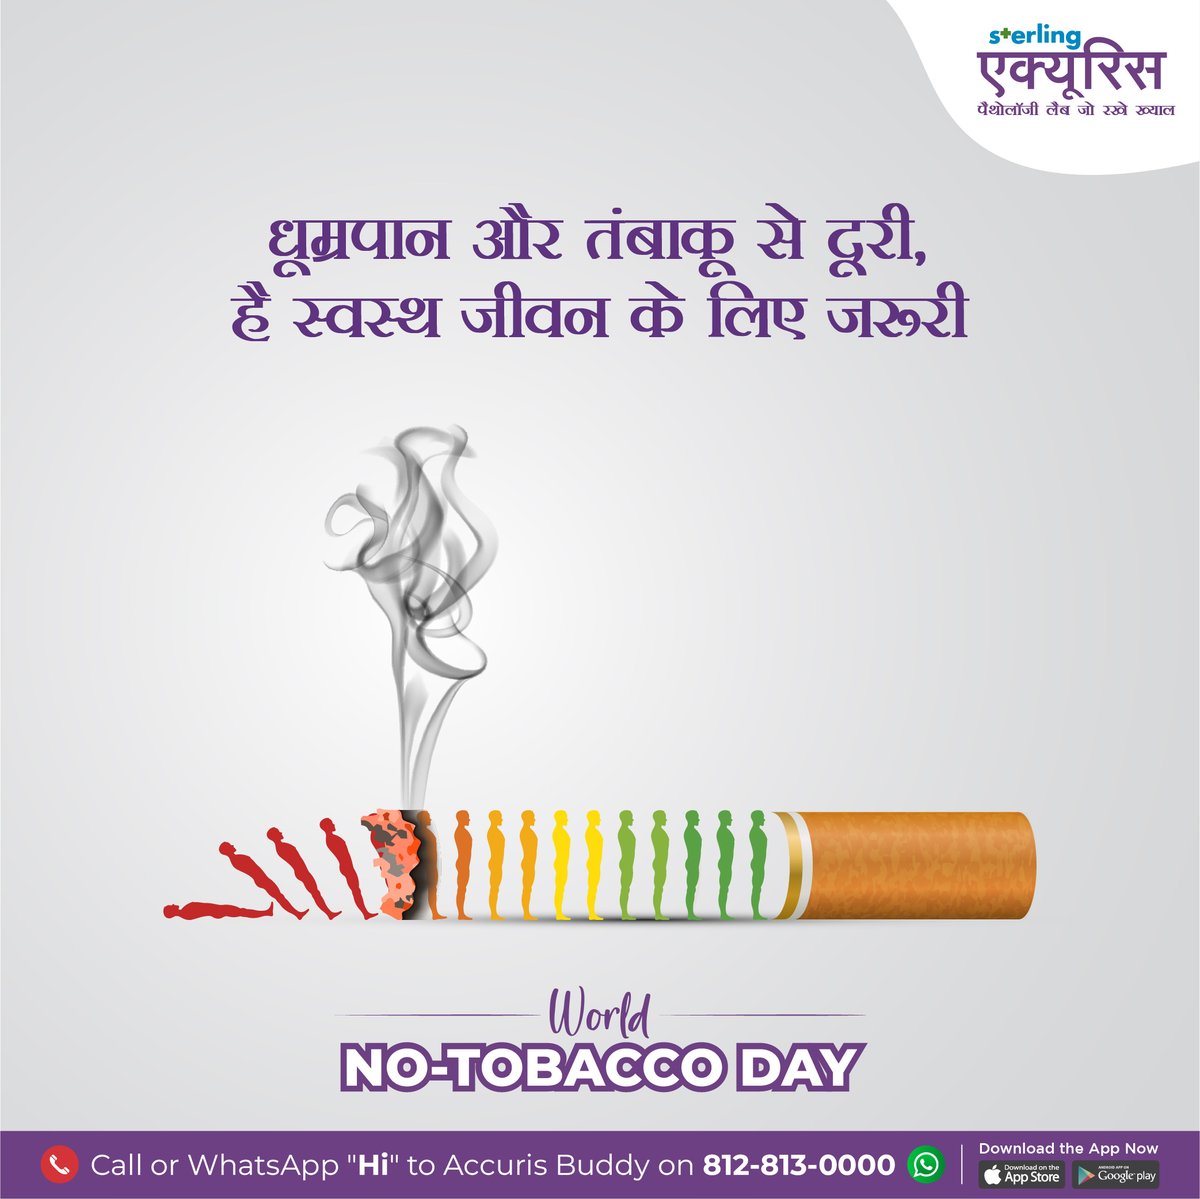 This World No Tobacco Day, choose a breath of fresh air for a healthier, tobacco-free life.

#WorldNoTabaccoDay #QuitTabacco #QuitSmoking #HealthyLife #Bodycheckup #HealthPackage #Pathology #Pathologylab #PathLab #PreventiveHealthCare #HealthCare #AccurisHomeCollection